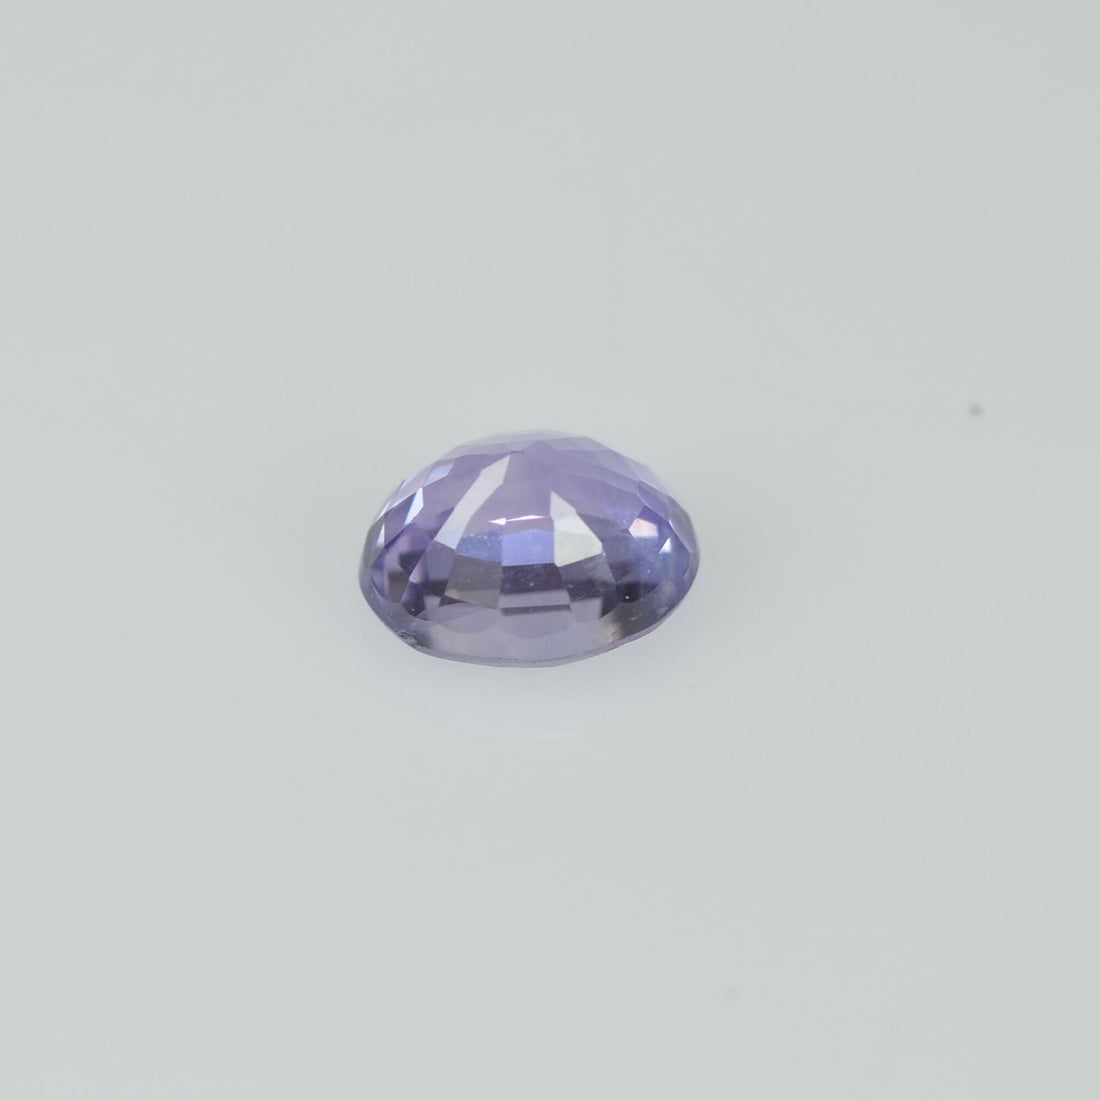 0.35 cts Natural Lavender Sapphire Loose Gemstone Oval Cut